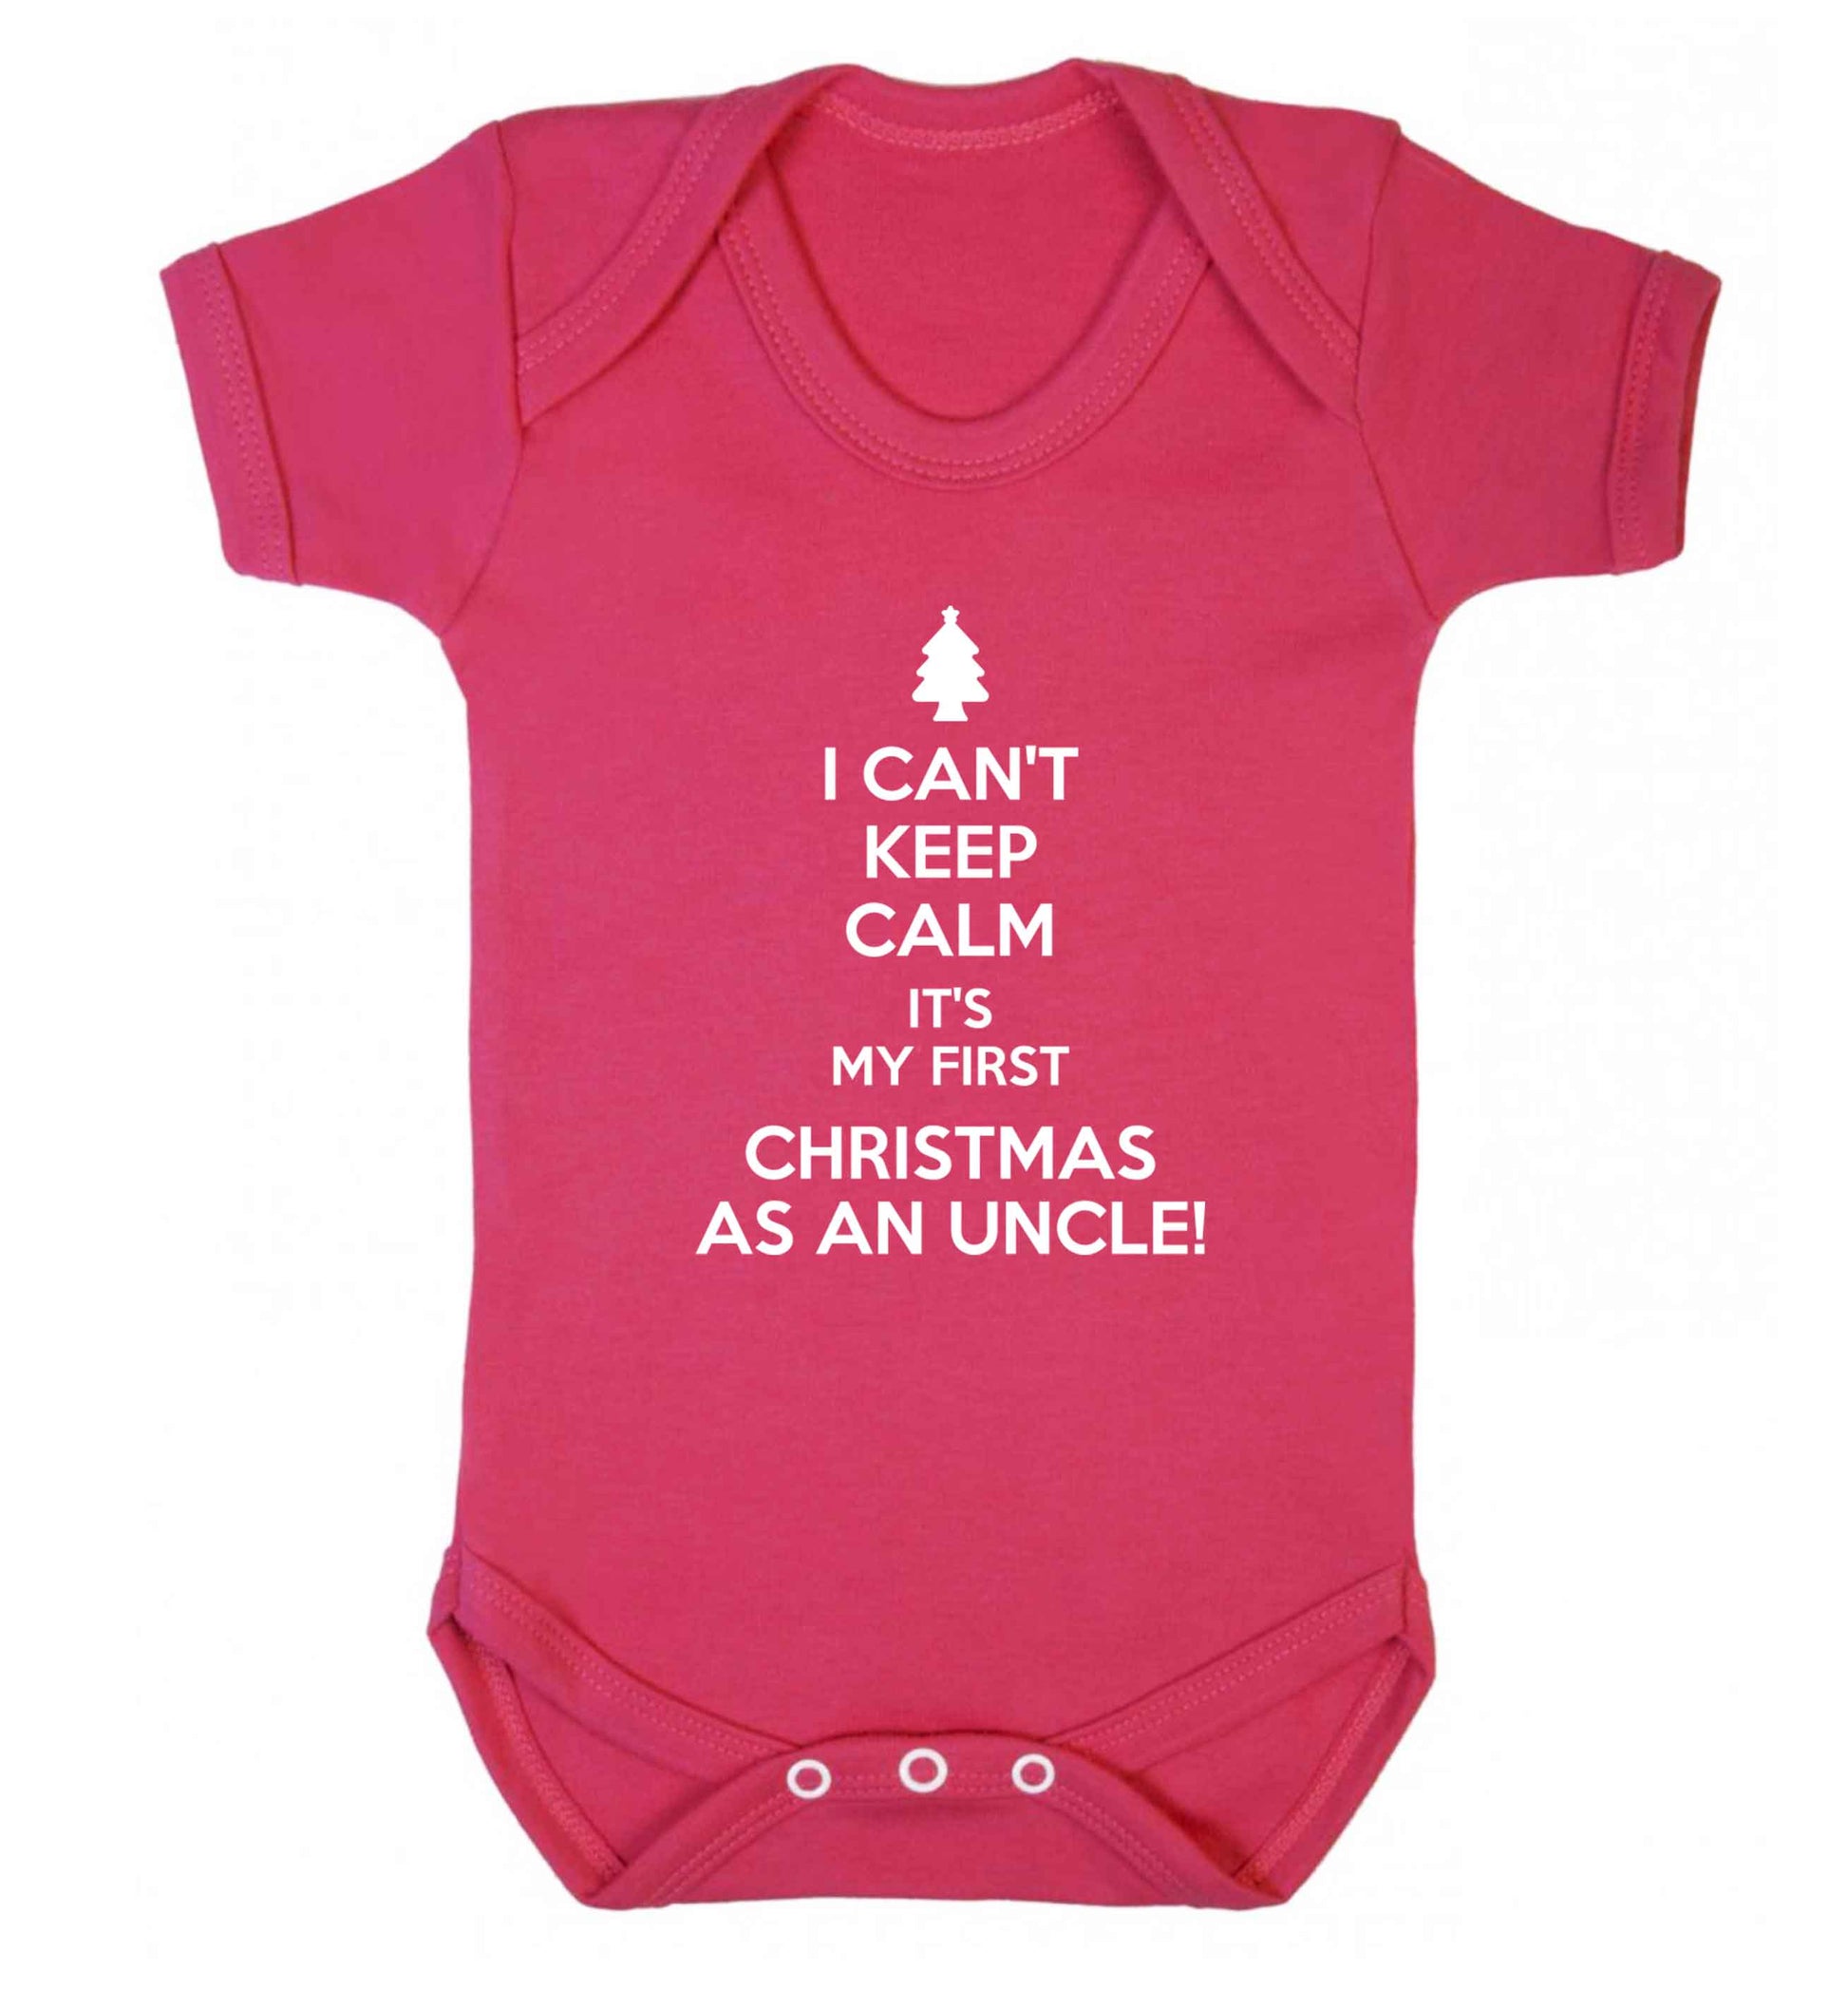 I can't keep calm it's my first Christmas as an uncle! Baby Vest dark pink 18-24 months